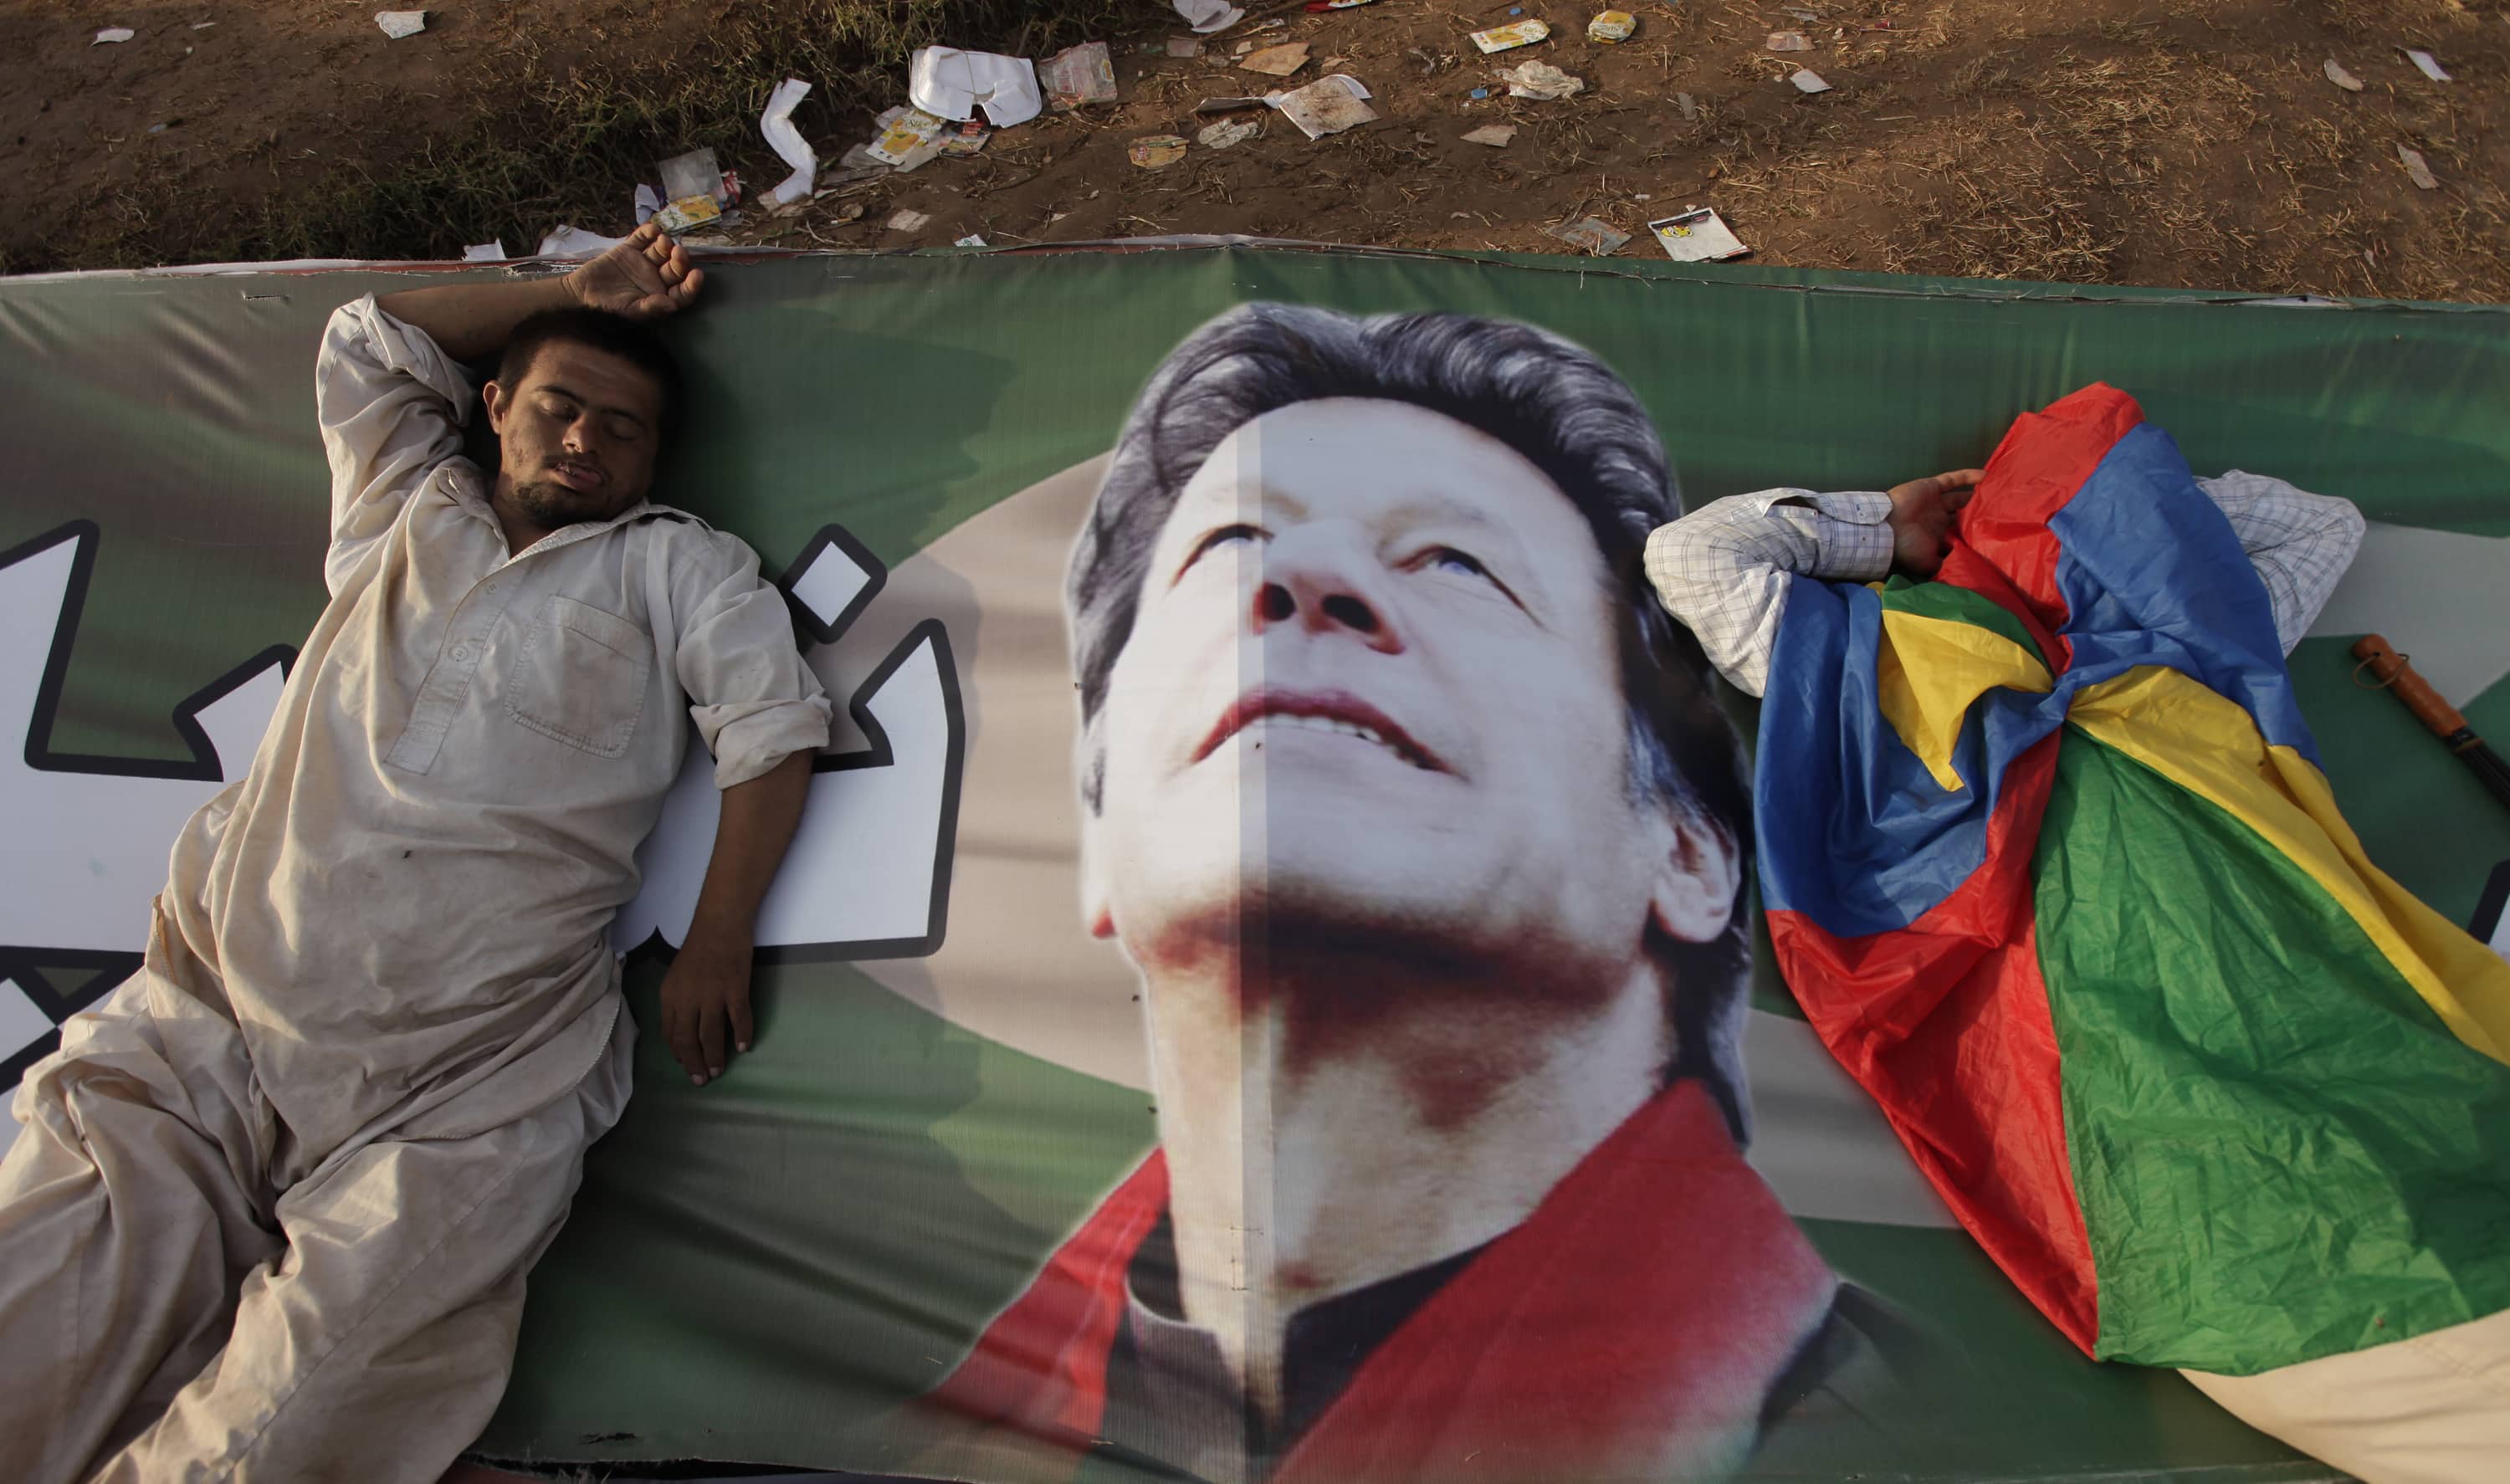 Supporters of Imran Khan, the Chairman of the Pakistan Tehreek-e-Insaf (PTI) political party, take a nap on Khan's campaign banner during what has been dubbed a "freedom march" in Islamabad, 25 August 2014, REUTERS/Faisal Mahmood